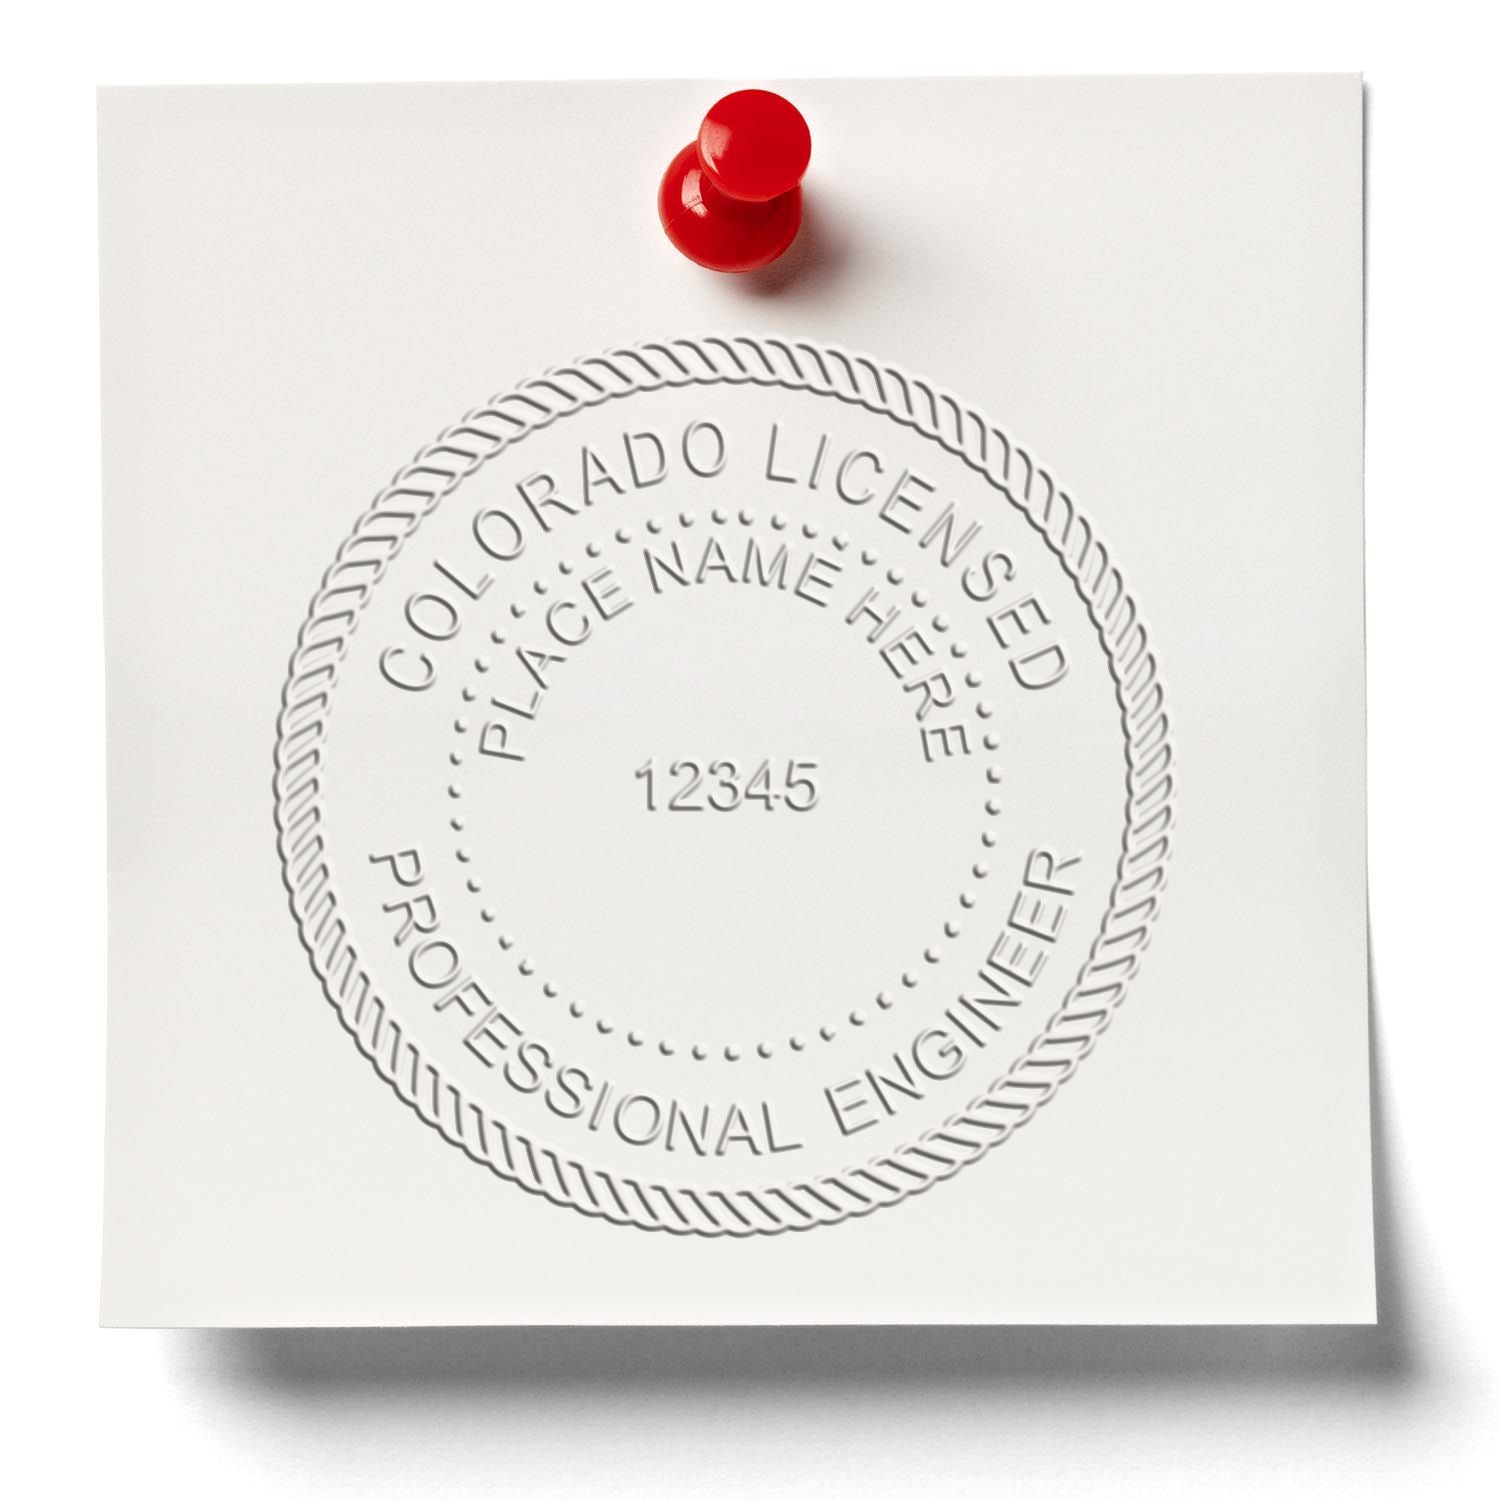 The Heavy Duty Cast Iron Colorado Engineer Seal Embosser stamp impression comes to life with a crisp, detailed photo on paper - showcasing true professional quality.